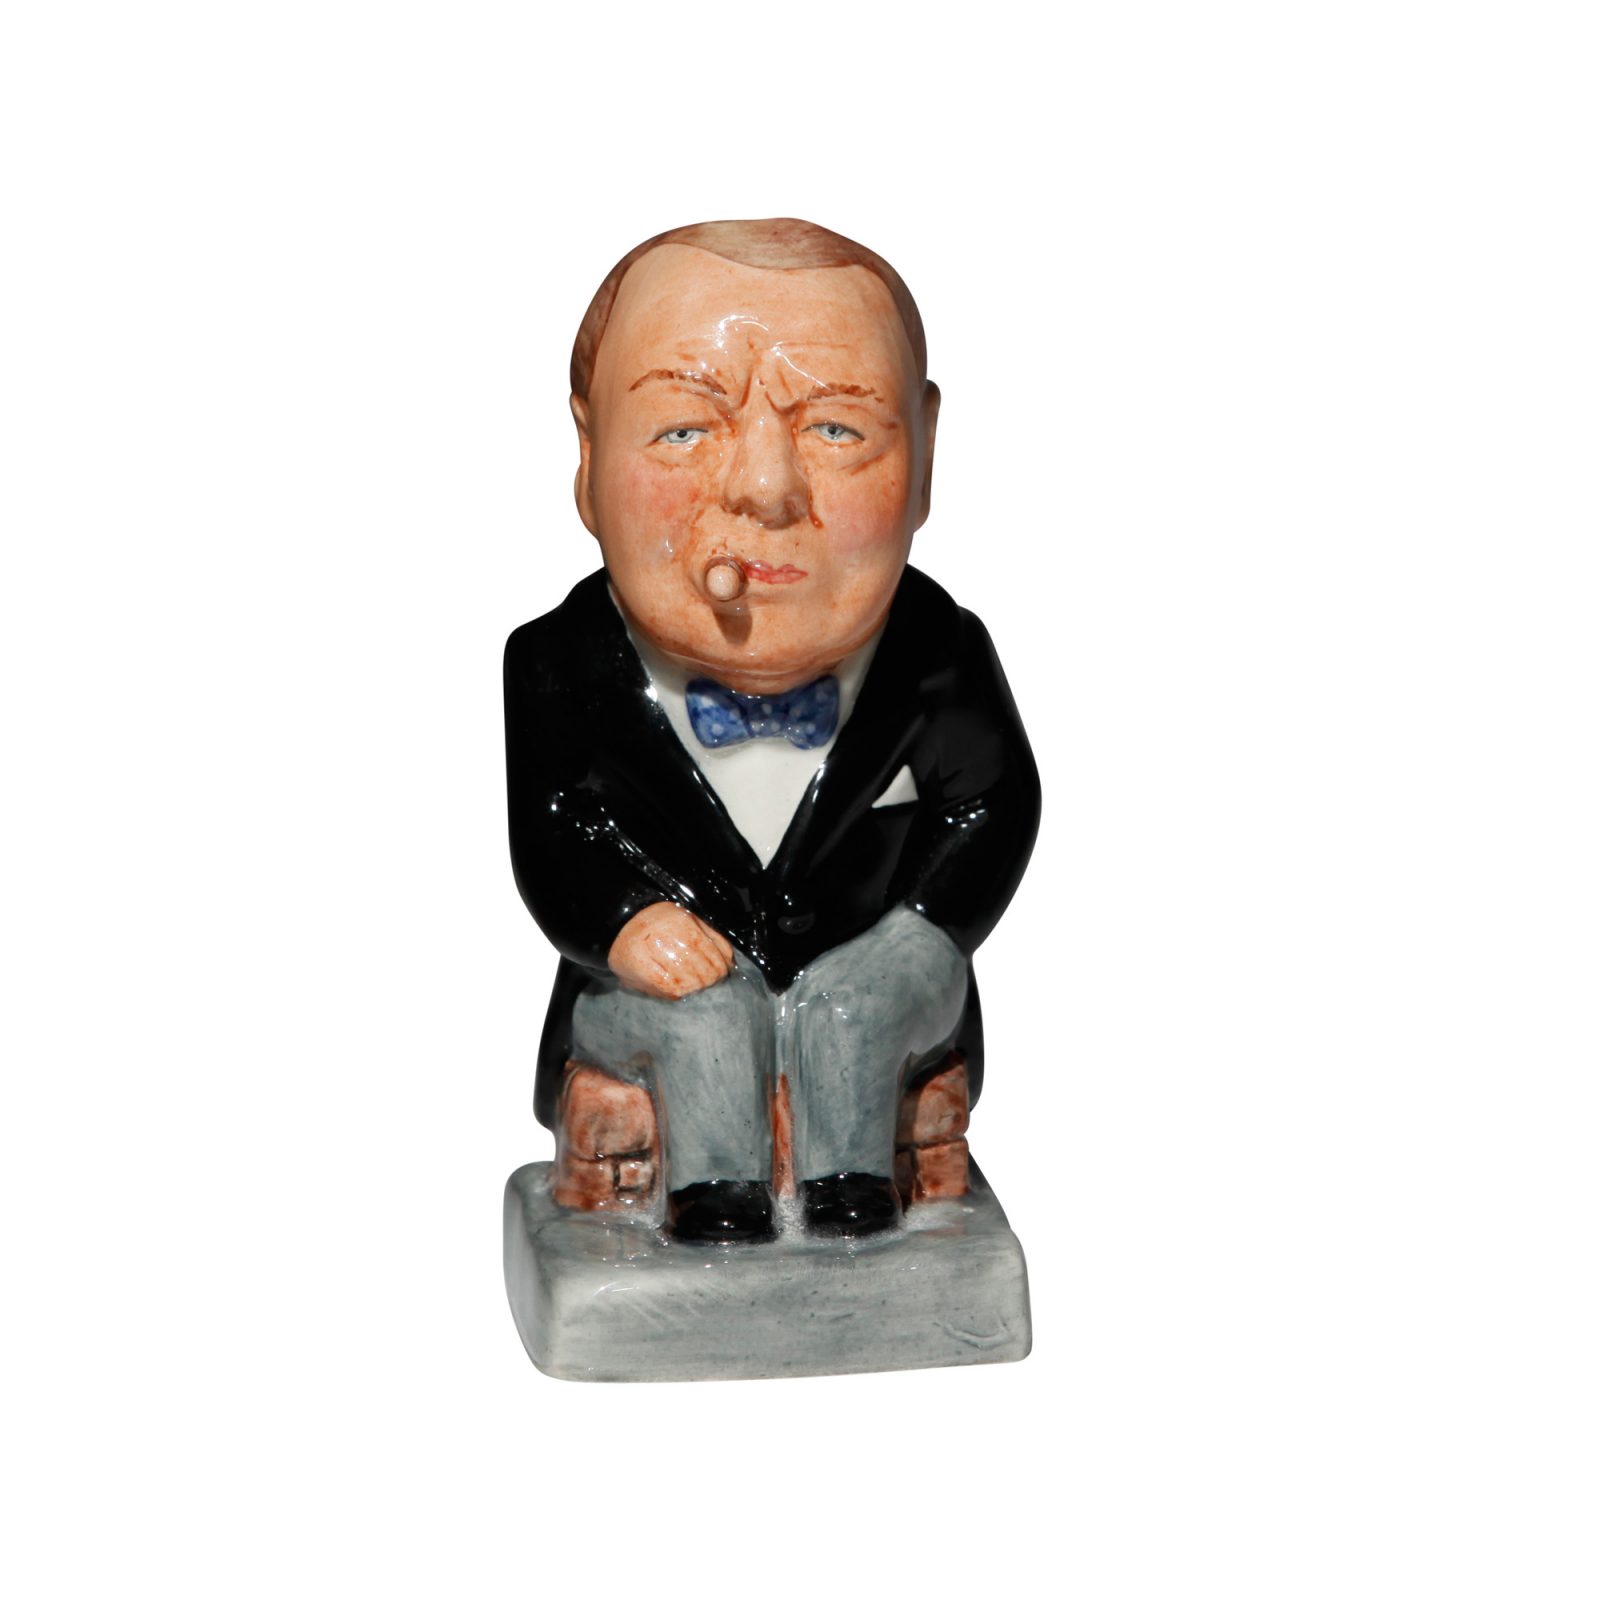 Winston Churchill Toby Jug - (Black jacket and grey pants) - Bairstow Manor Collectables